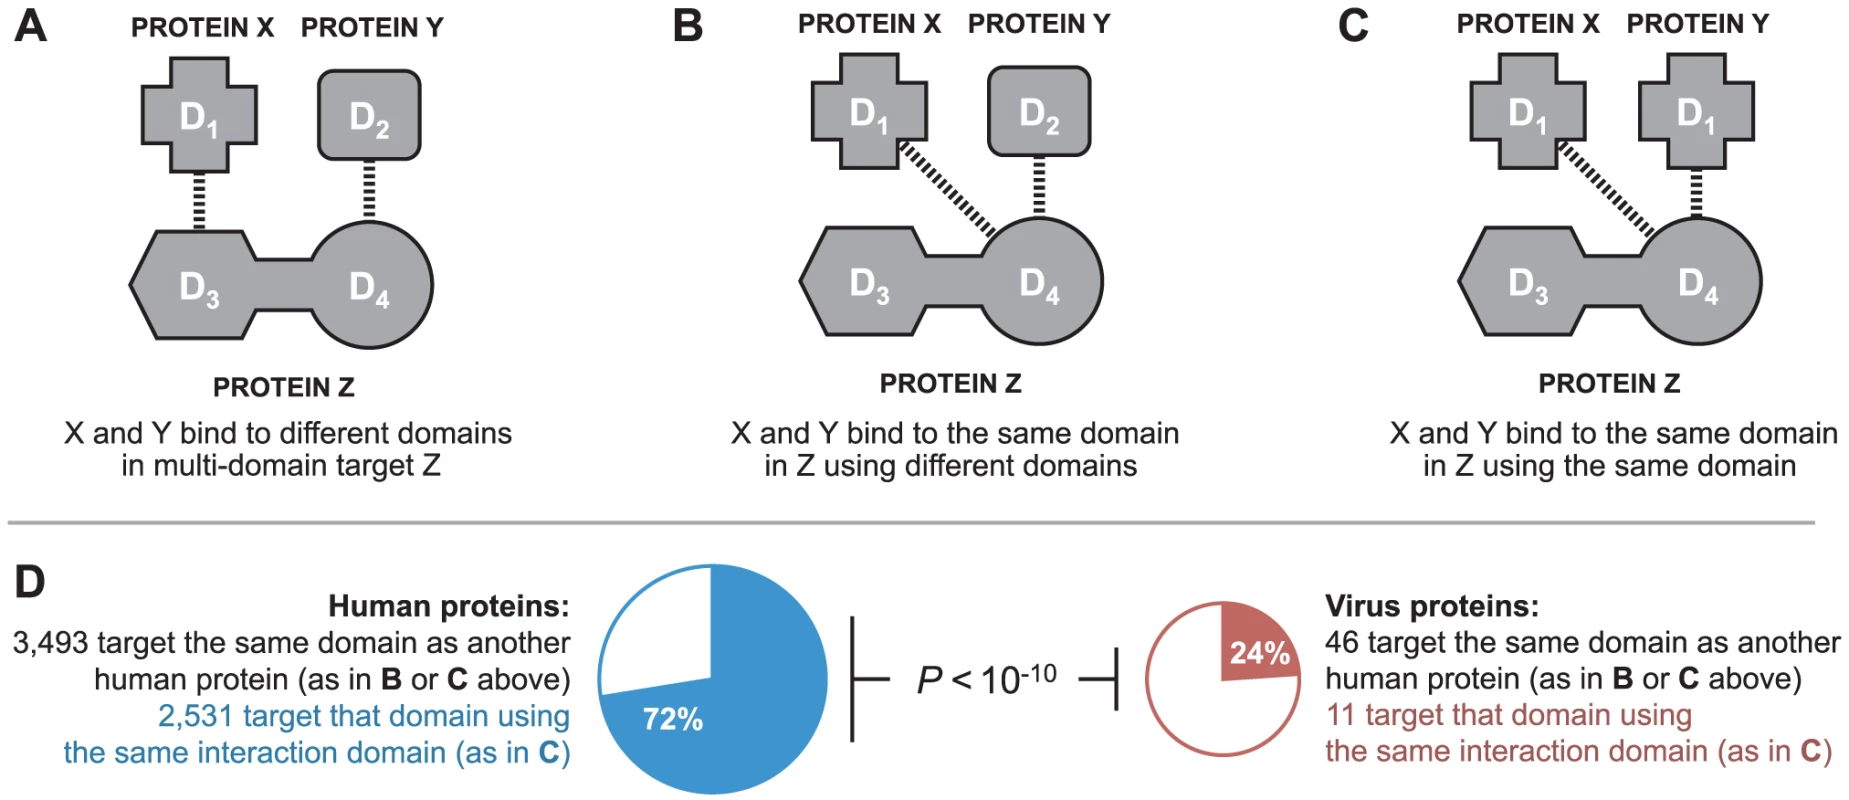 Binding site mimicry evolves differently in virus and host proteins.